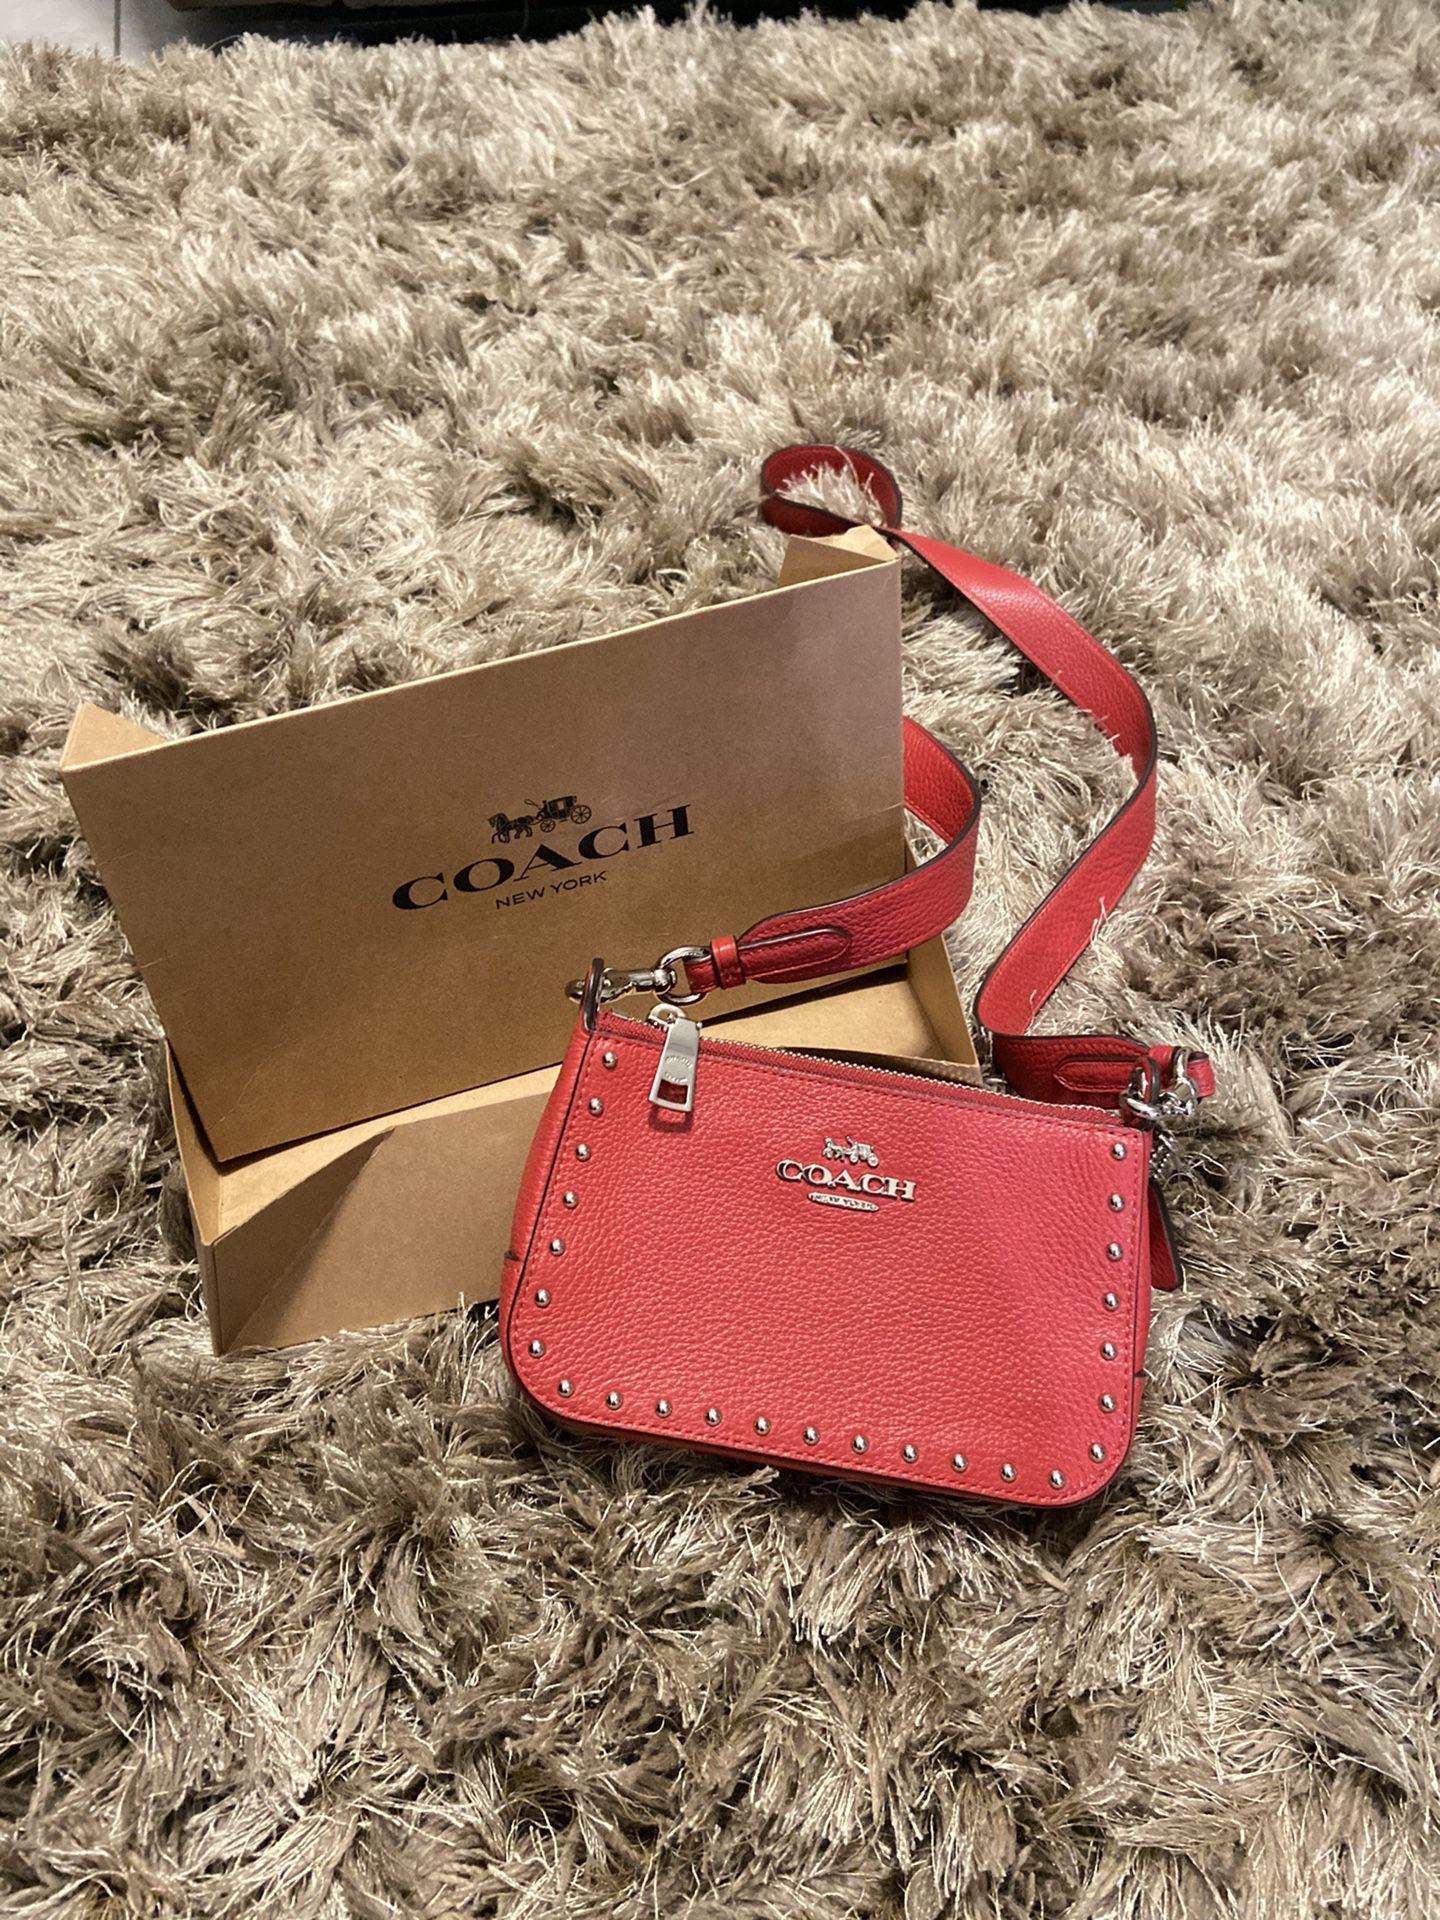 New coach over shoulder purse (used for a wedding)